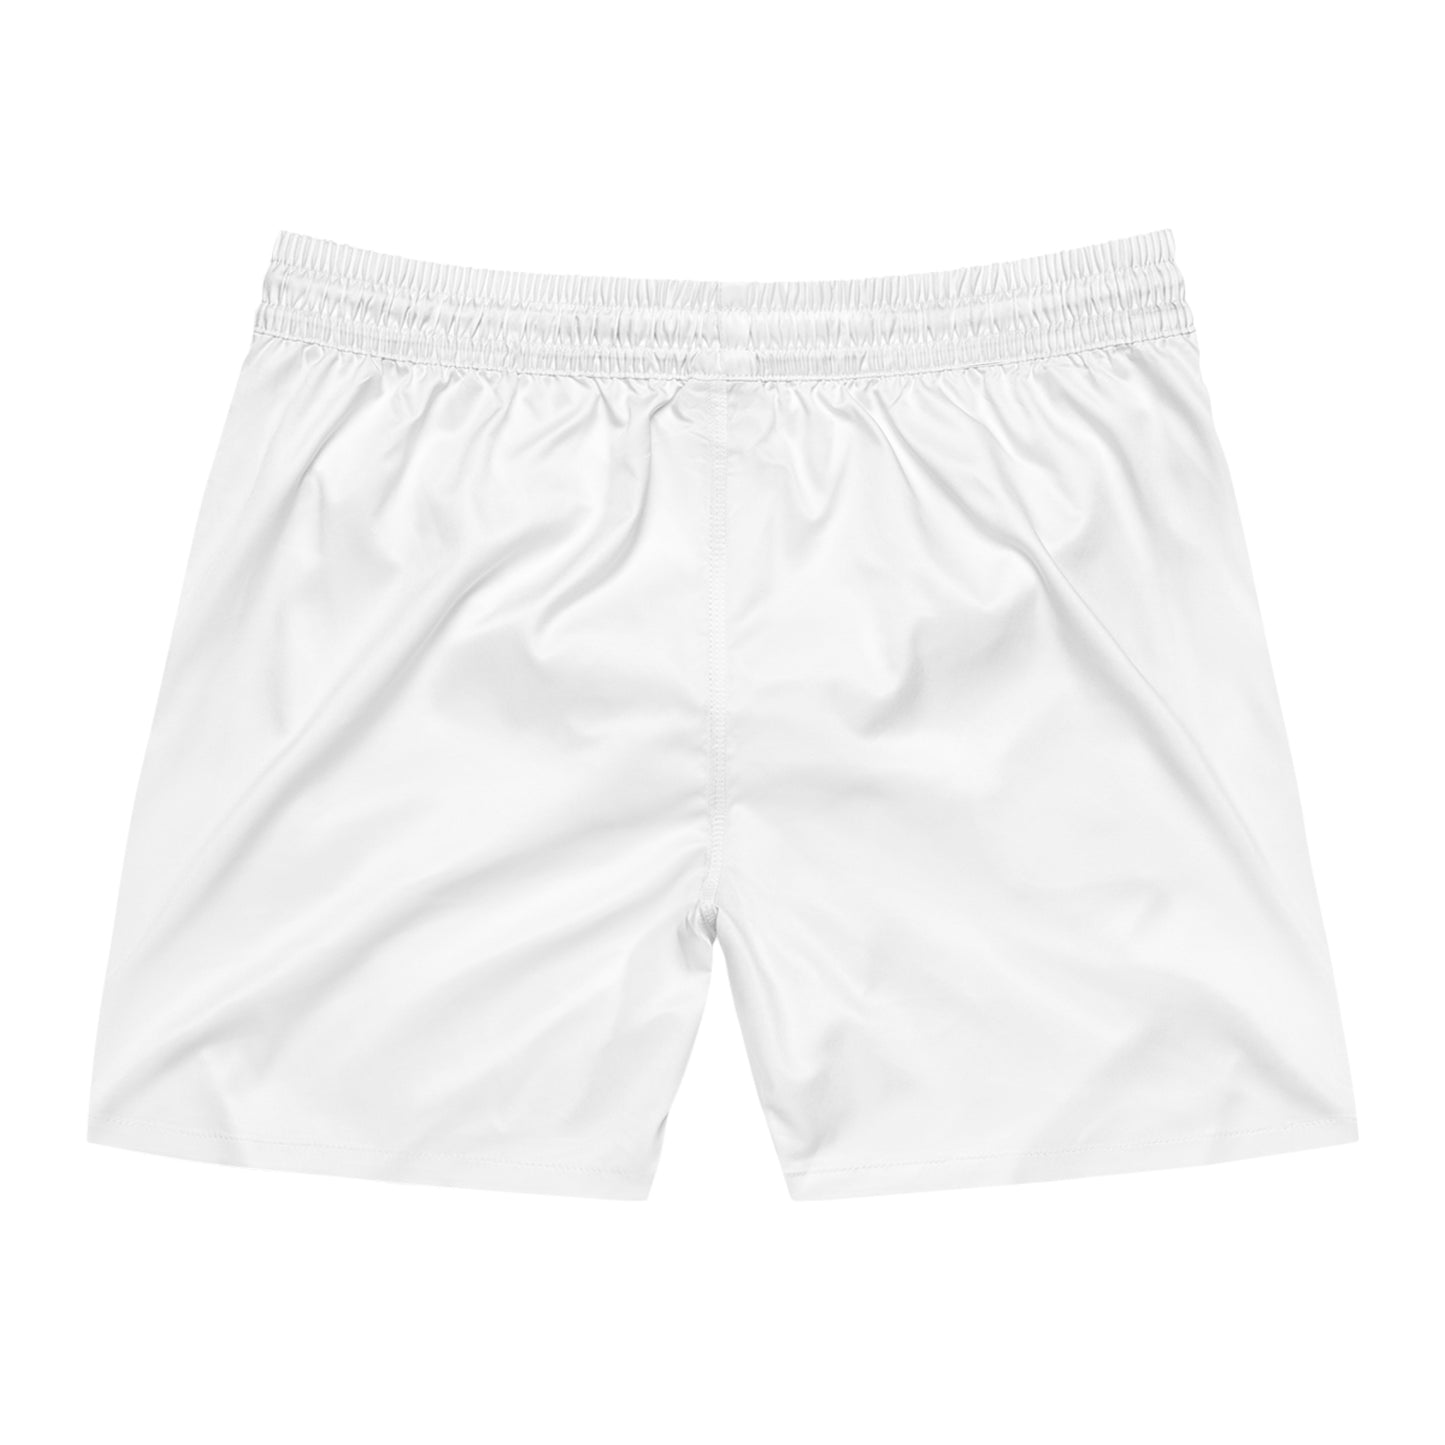 Stay In Spirit/ Fostered by the Father Men's Mid-Length Swim Shorts